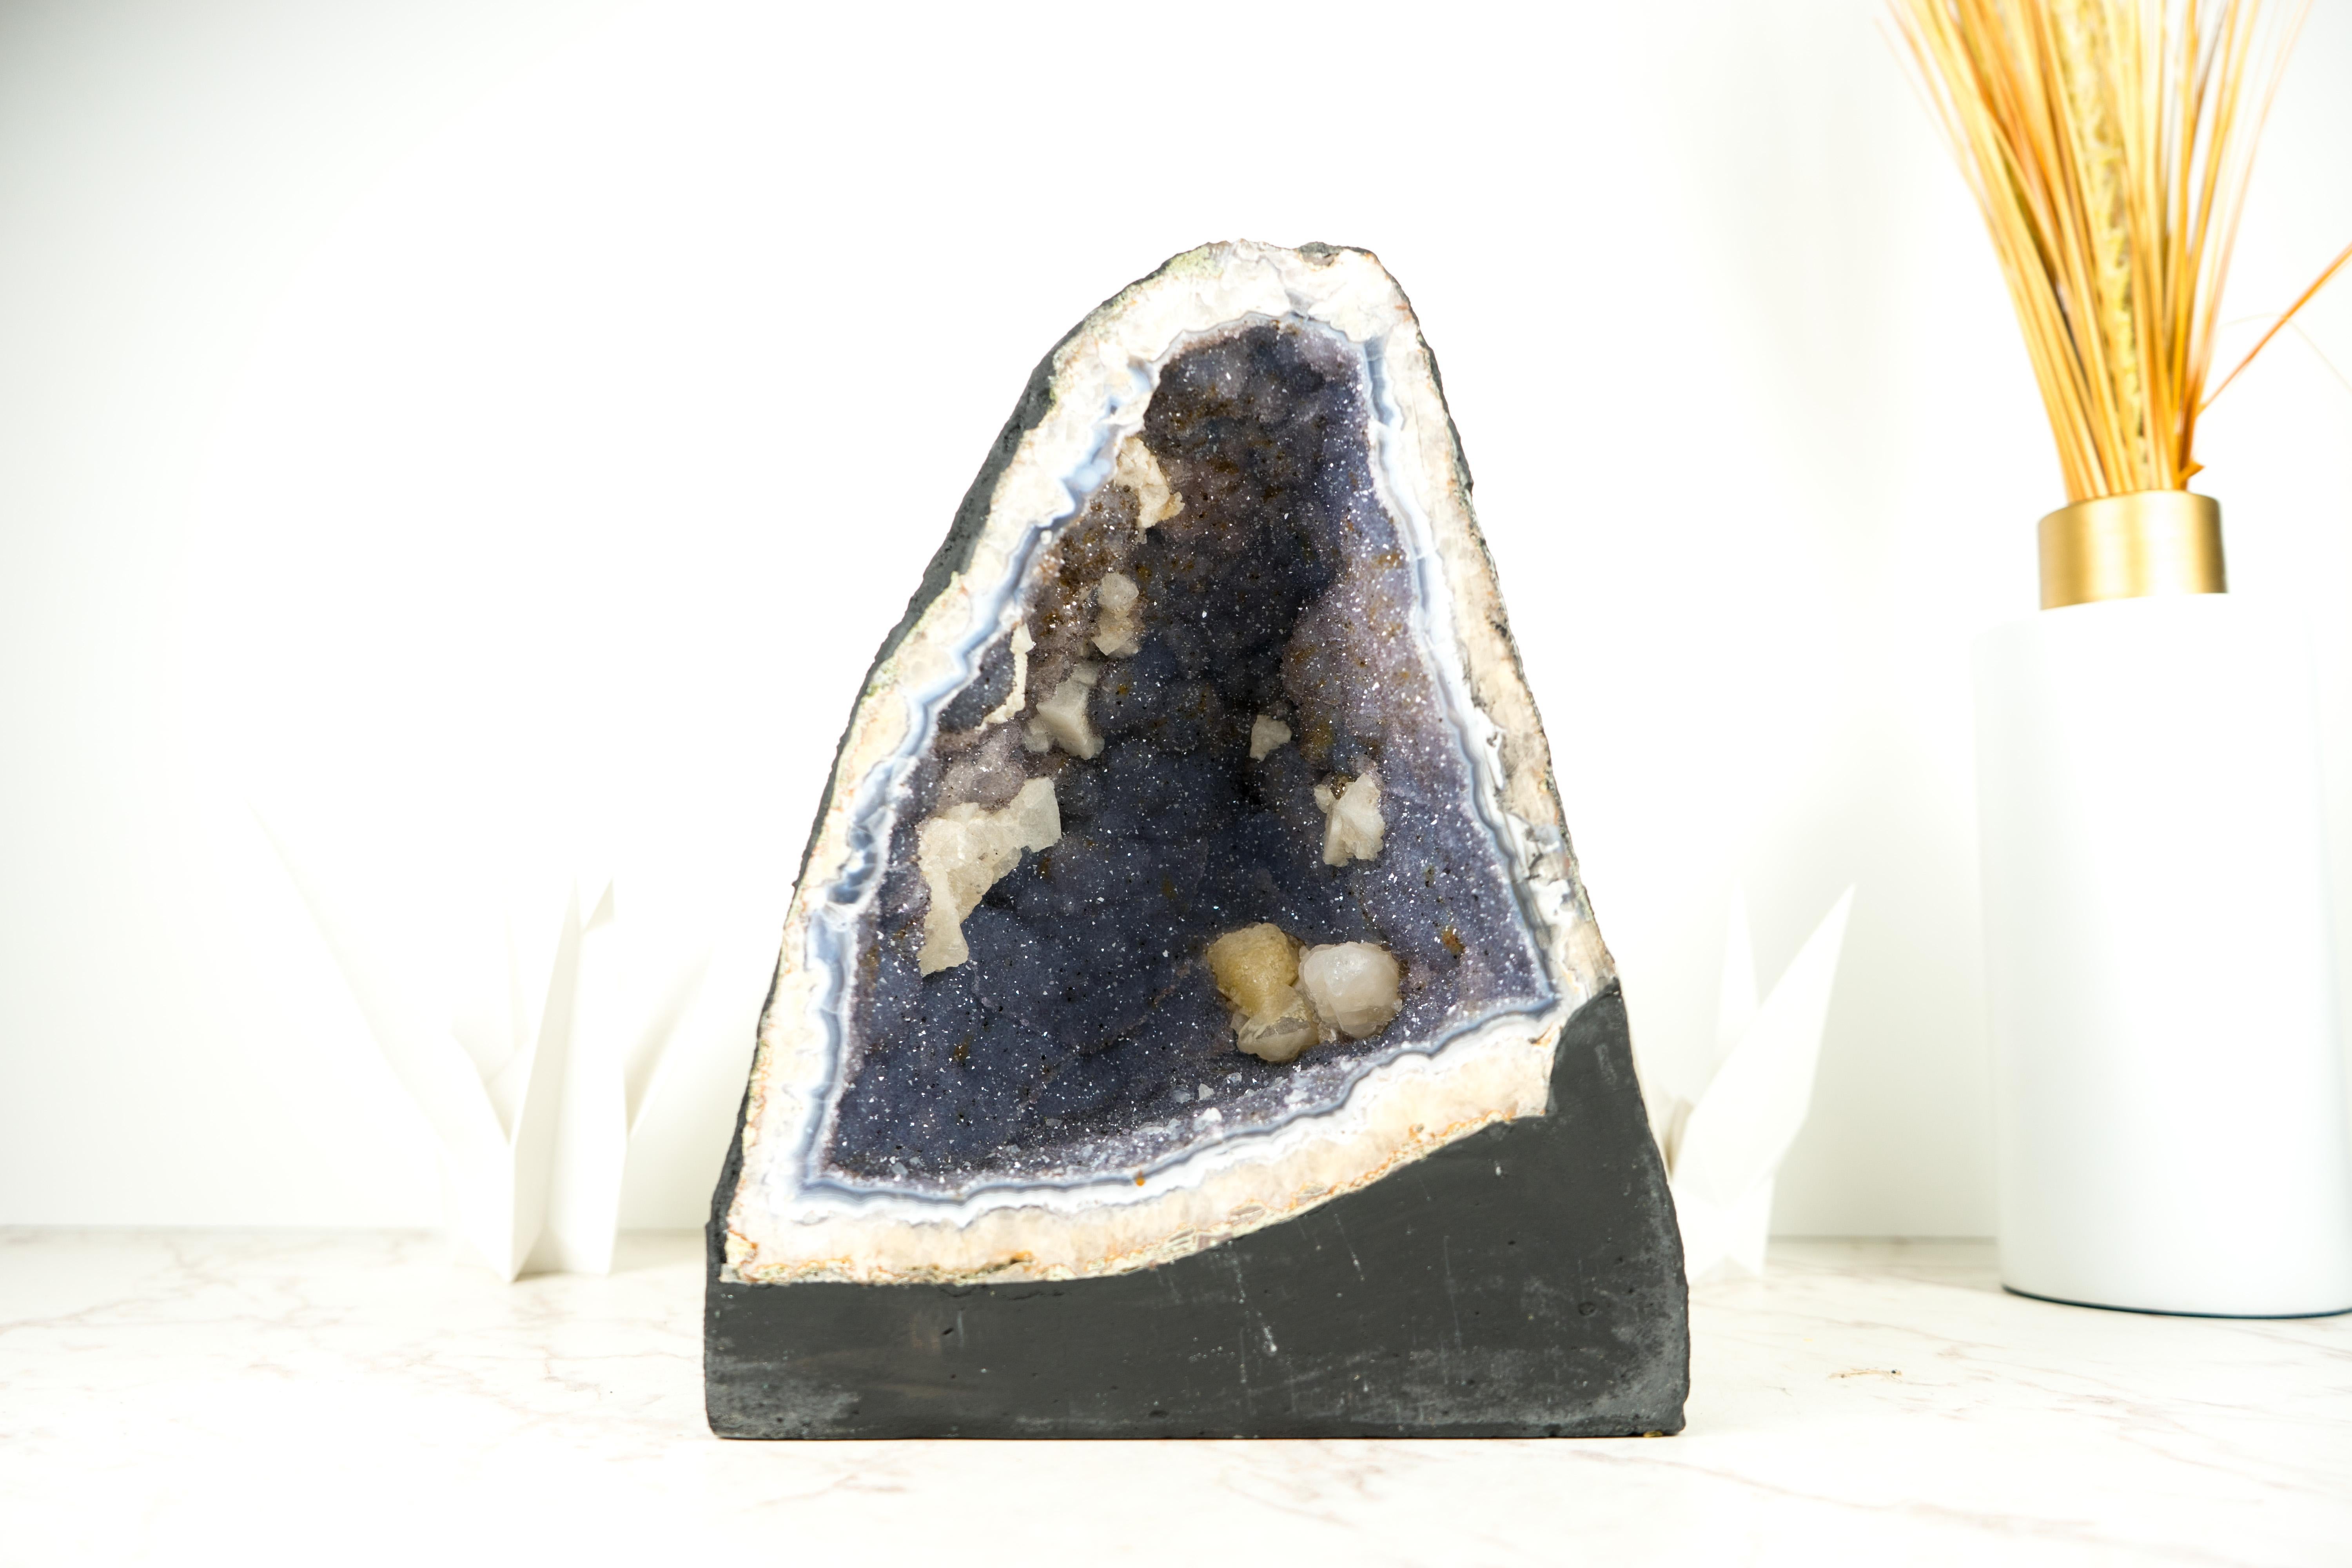 Brazilian Rare Blue Lace Agate Geode with Lavender Amethyst Druzy, Geode Cathedral For Sale